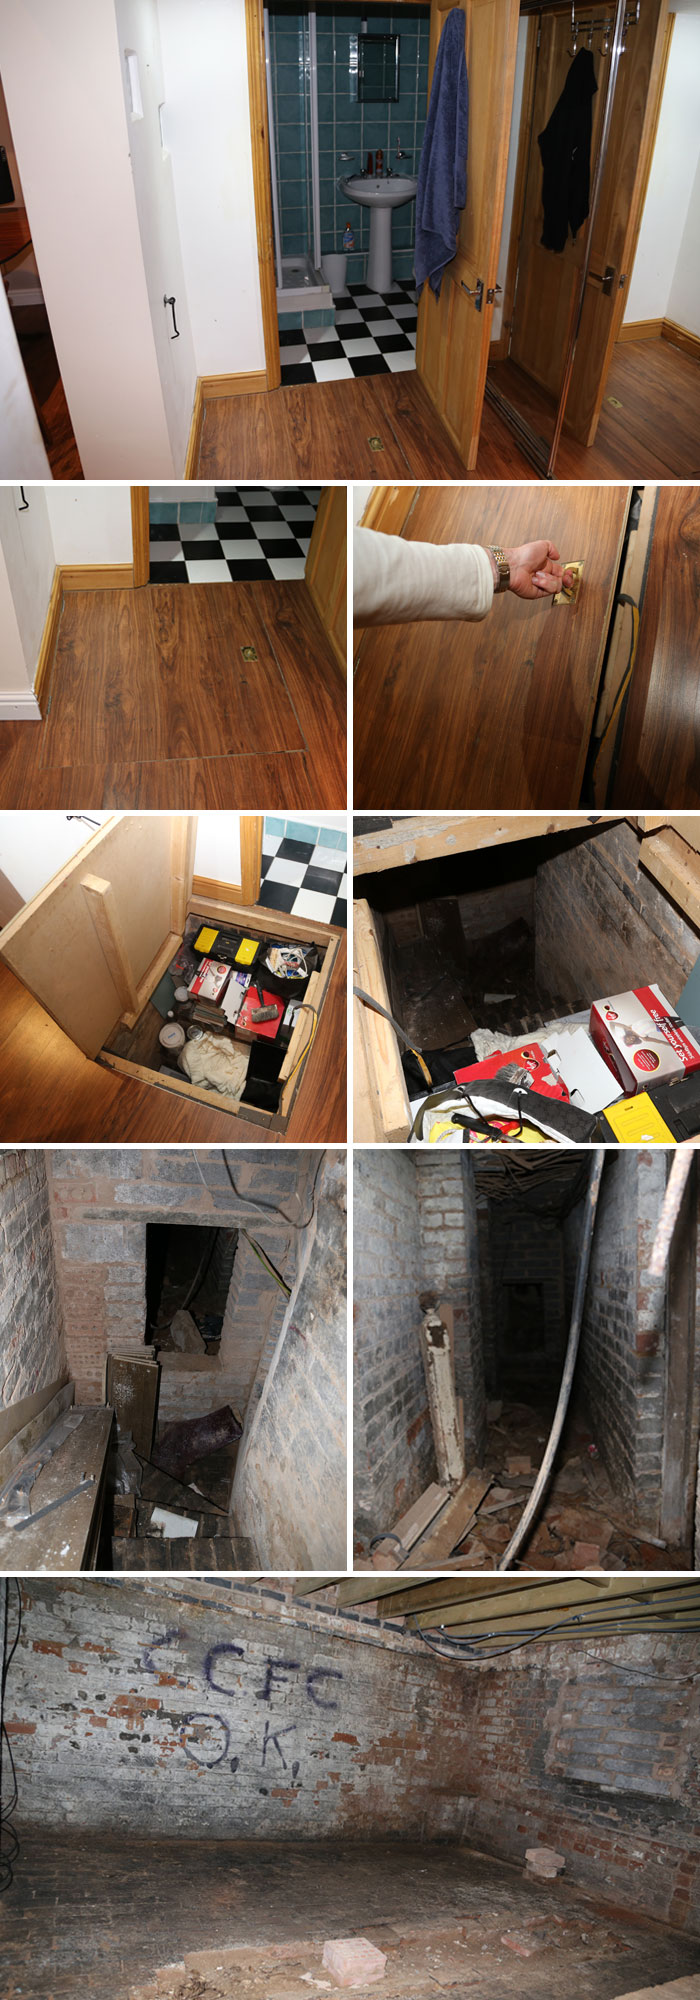 I Just Moved Into A New Apartment And Made A Big Discovery. There Is A Door In The Floor That Leads To A Secret Dungeon